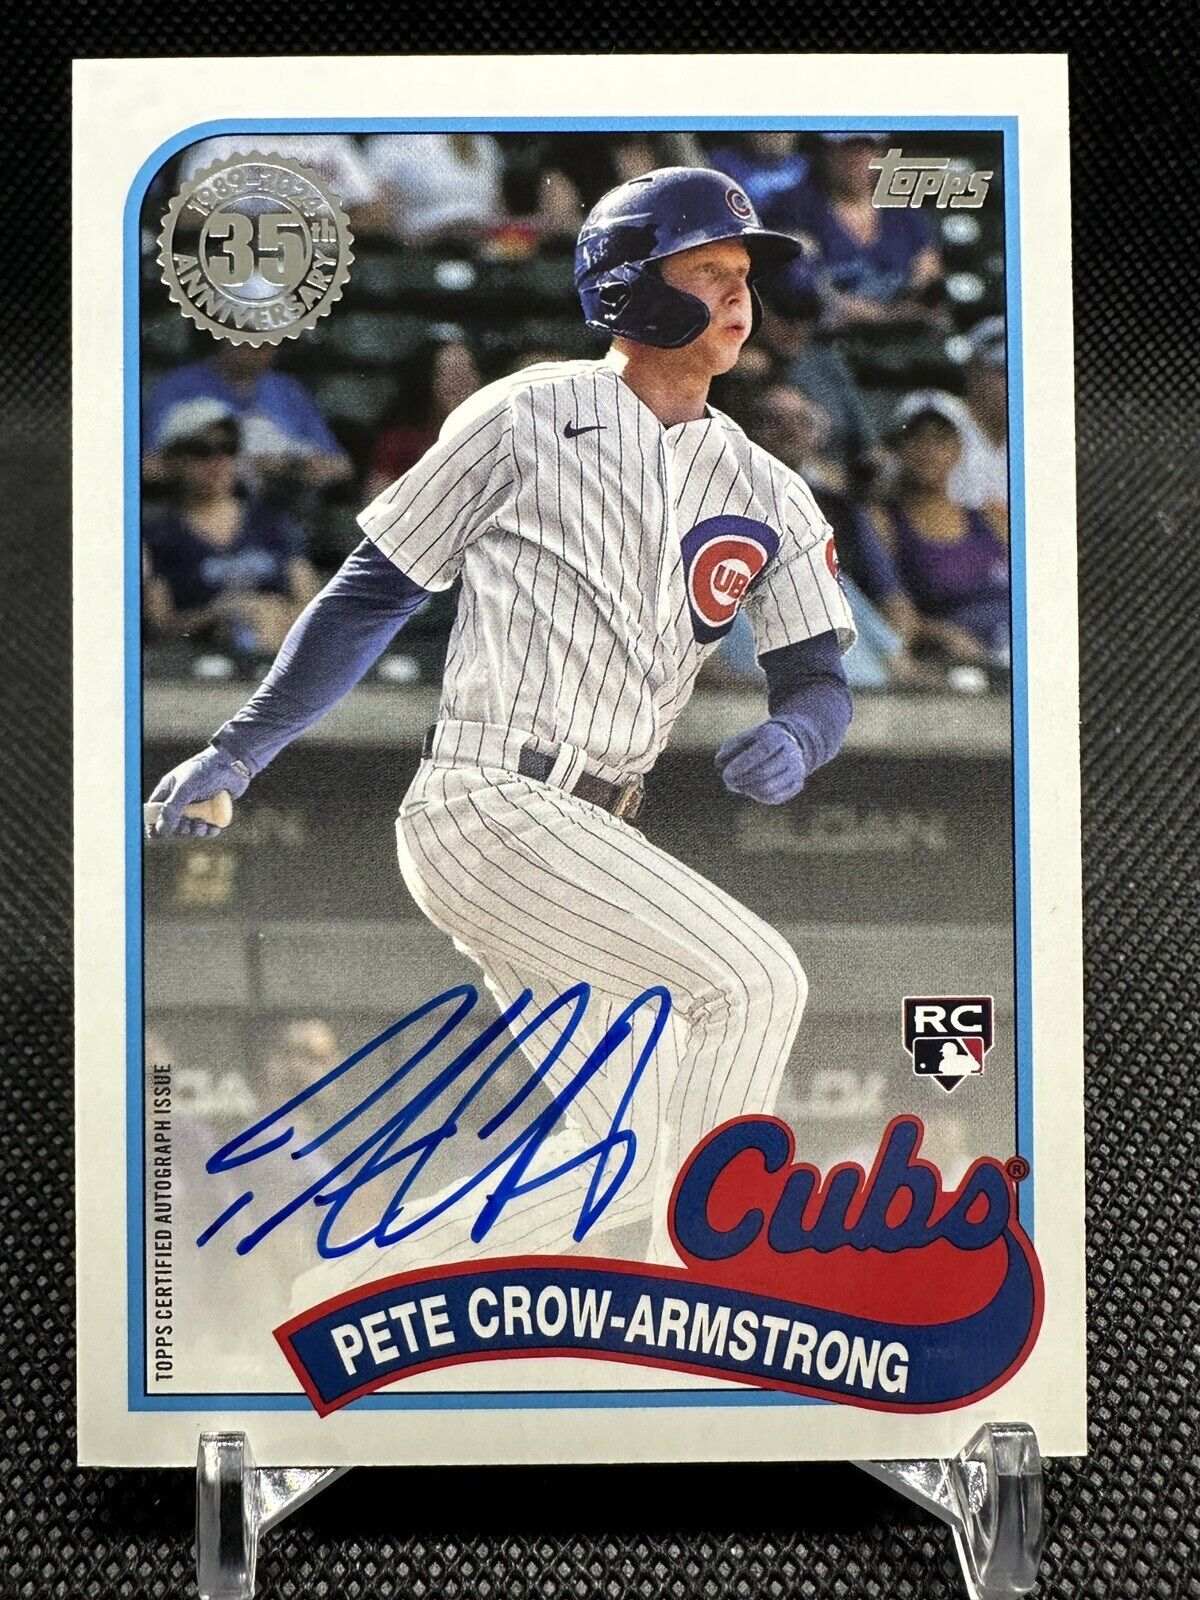 2024 Topps Series 1 Pete Crow-Armstrong 1989 Baseball Autograph rookie card